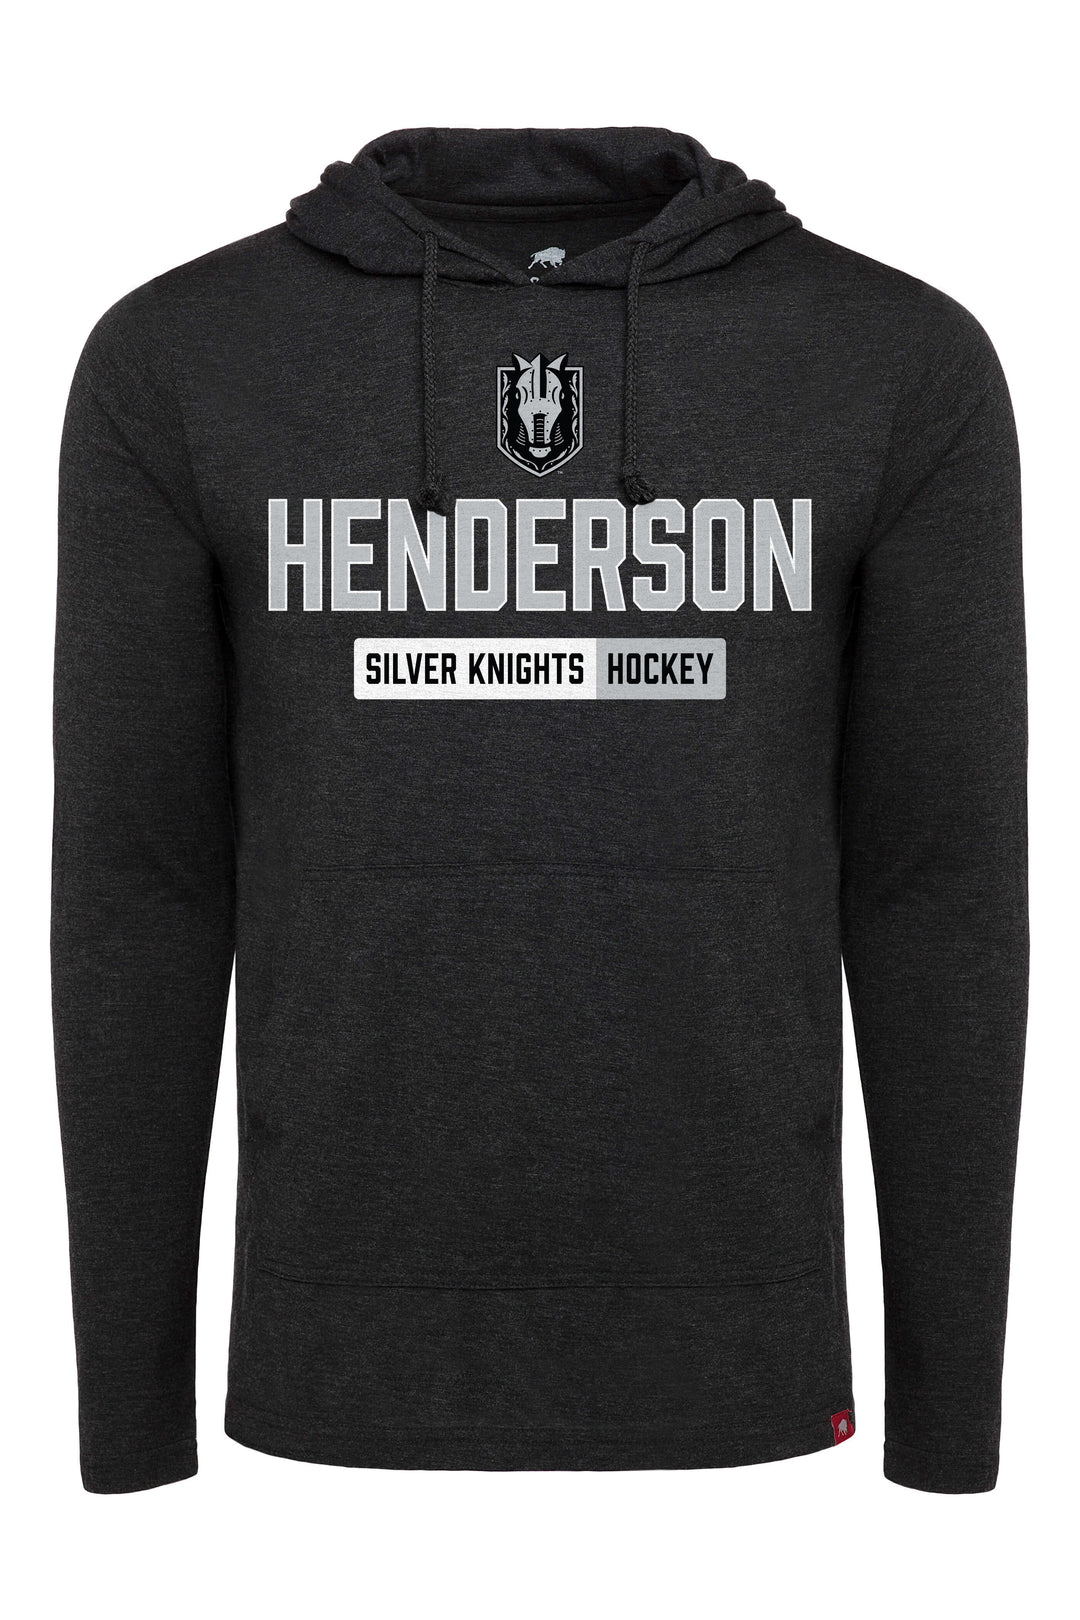 Henderson Silver Knights Youth Long Sleeve Tee with Hood - Vegas Team Store